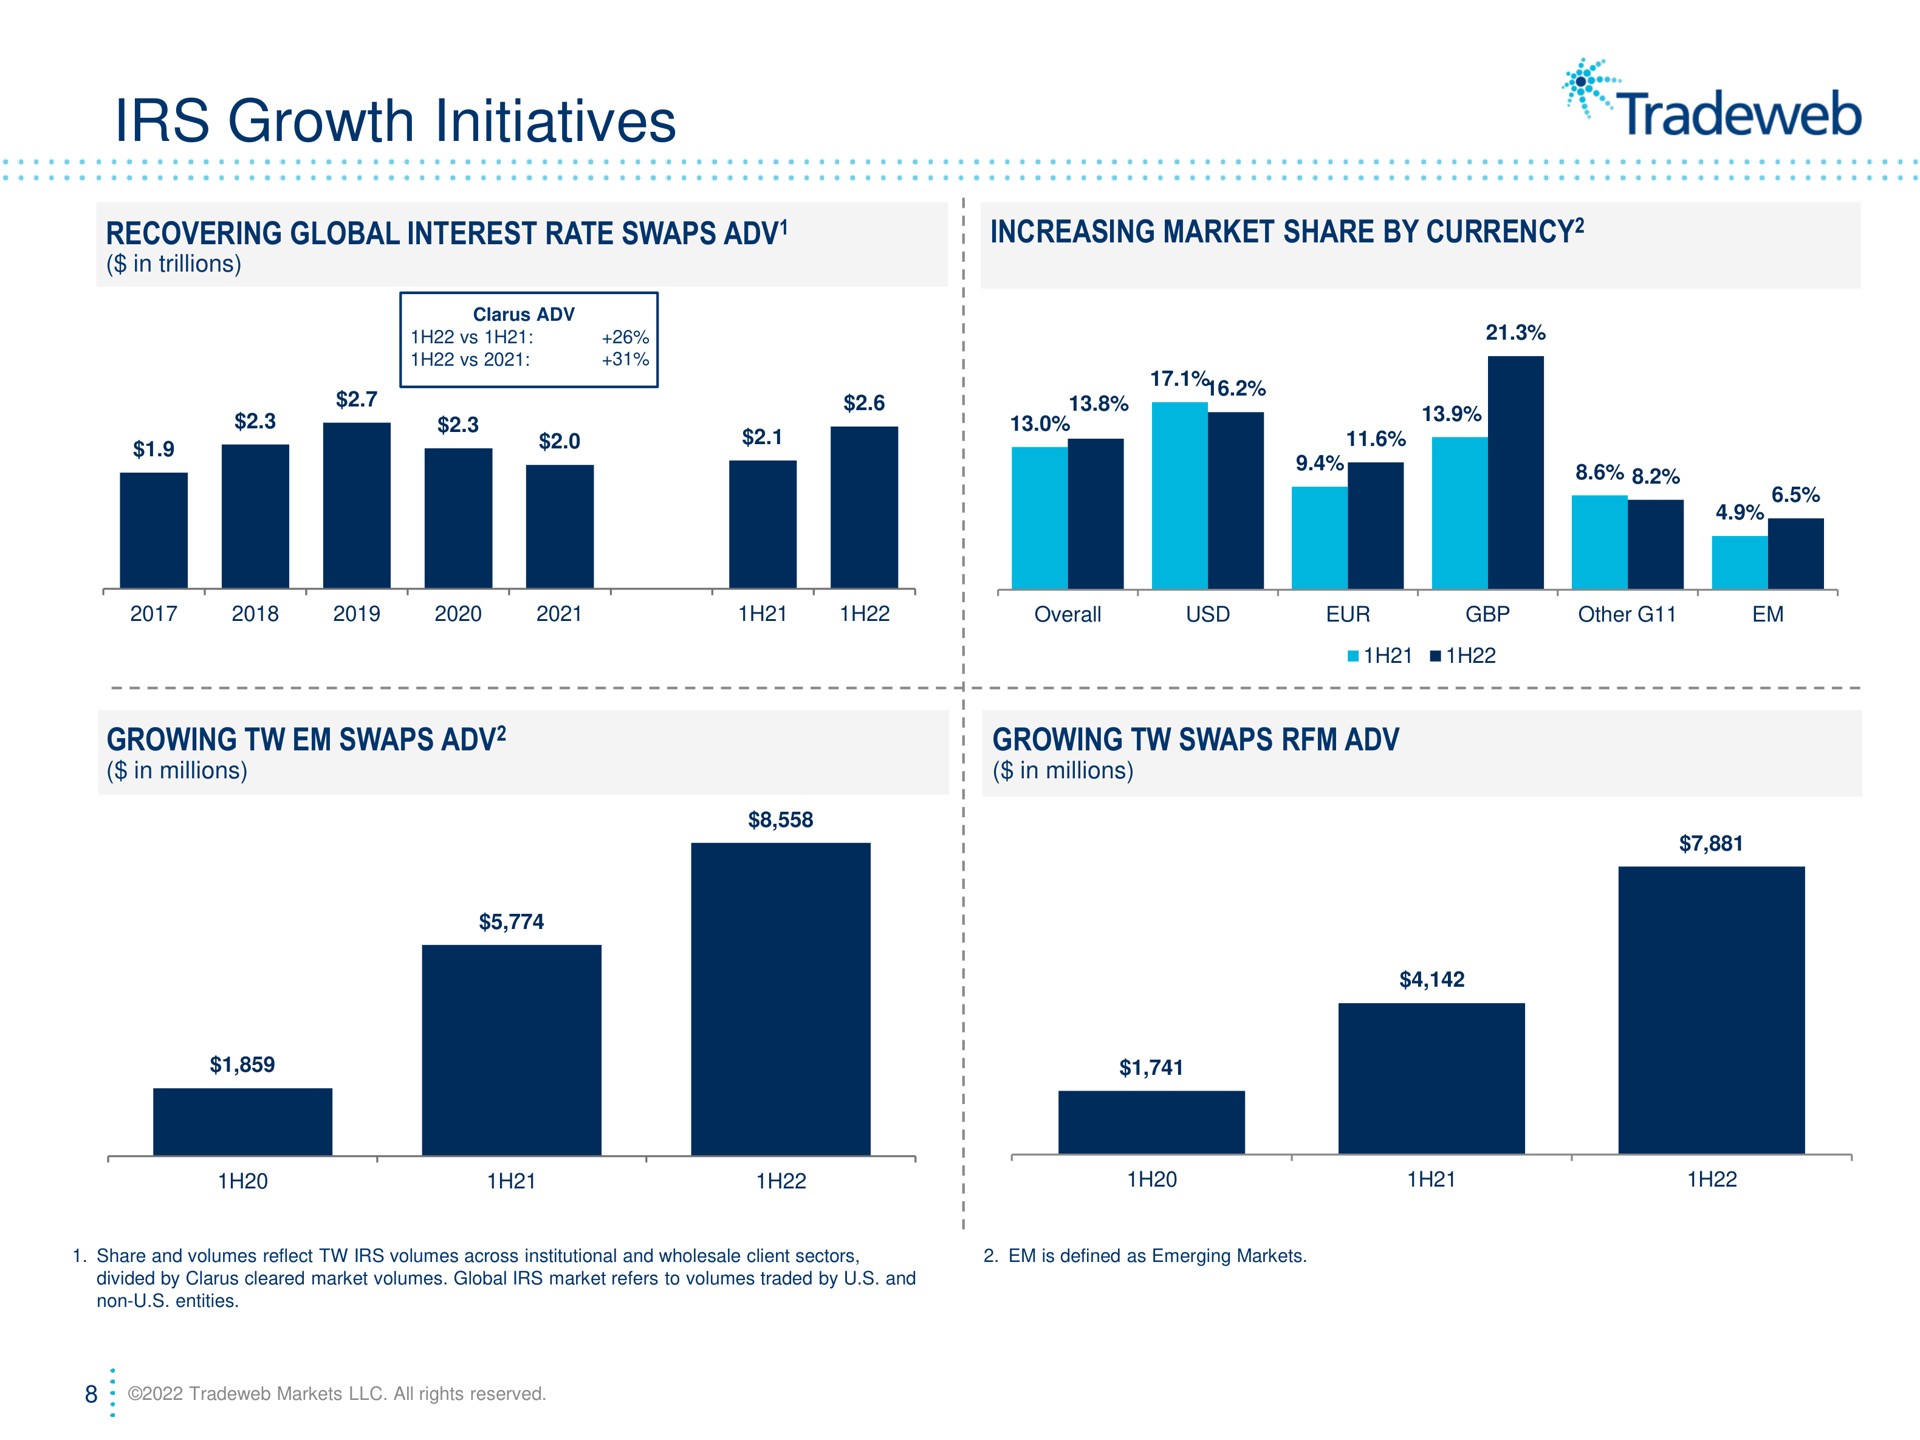 growth initiatives recovering global interest rate swaps increasing market share by currency growing swaps growing swaps | Tradeweb